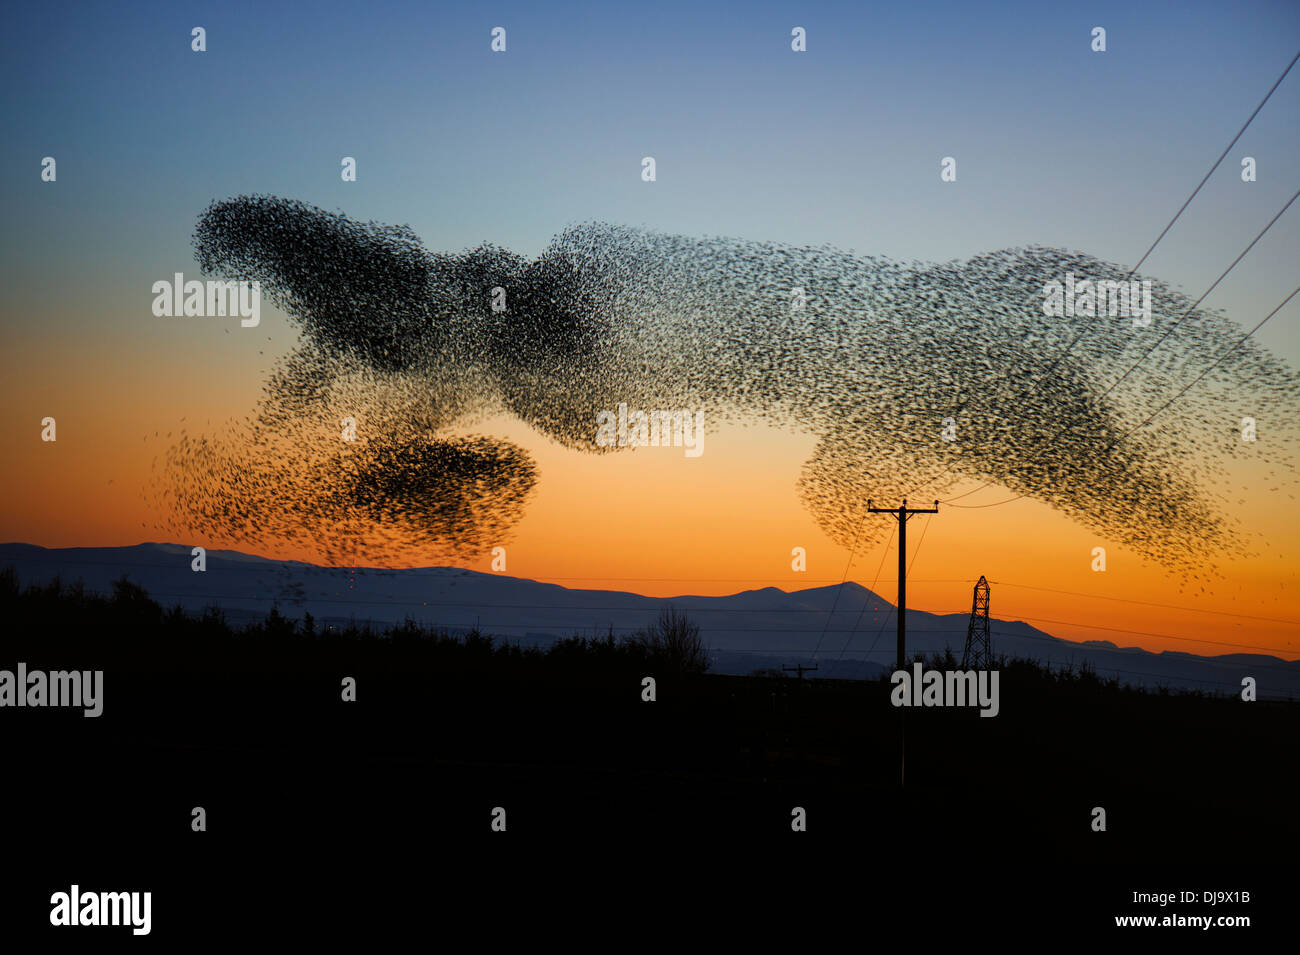 A starling murmuration or flock flying in an aerobatic display near Gretna, Scotland prior to roosting in November 2013. Stock Photo